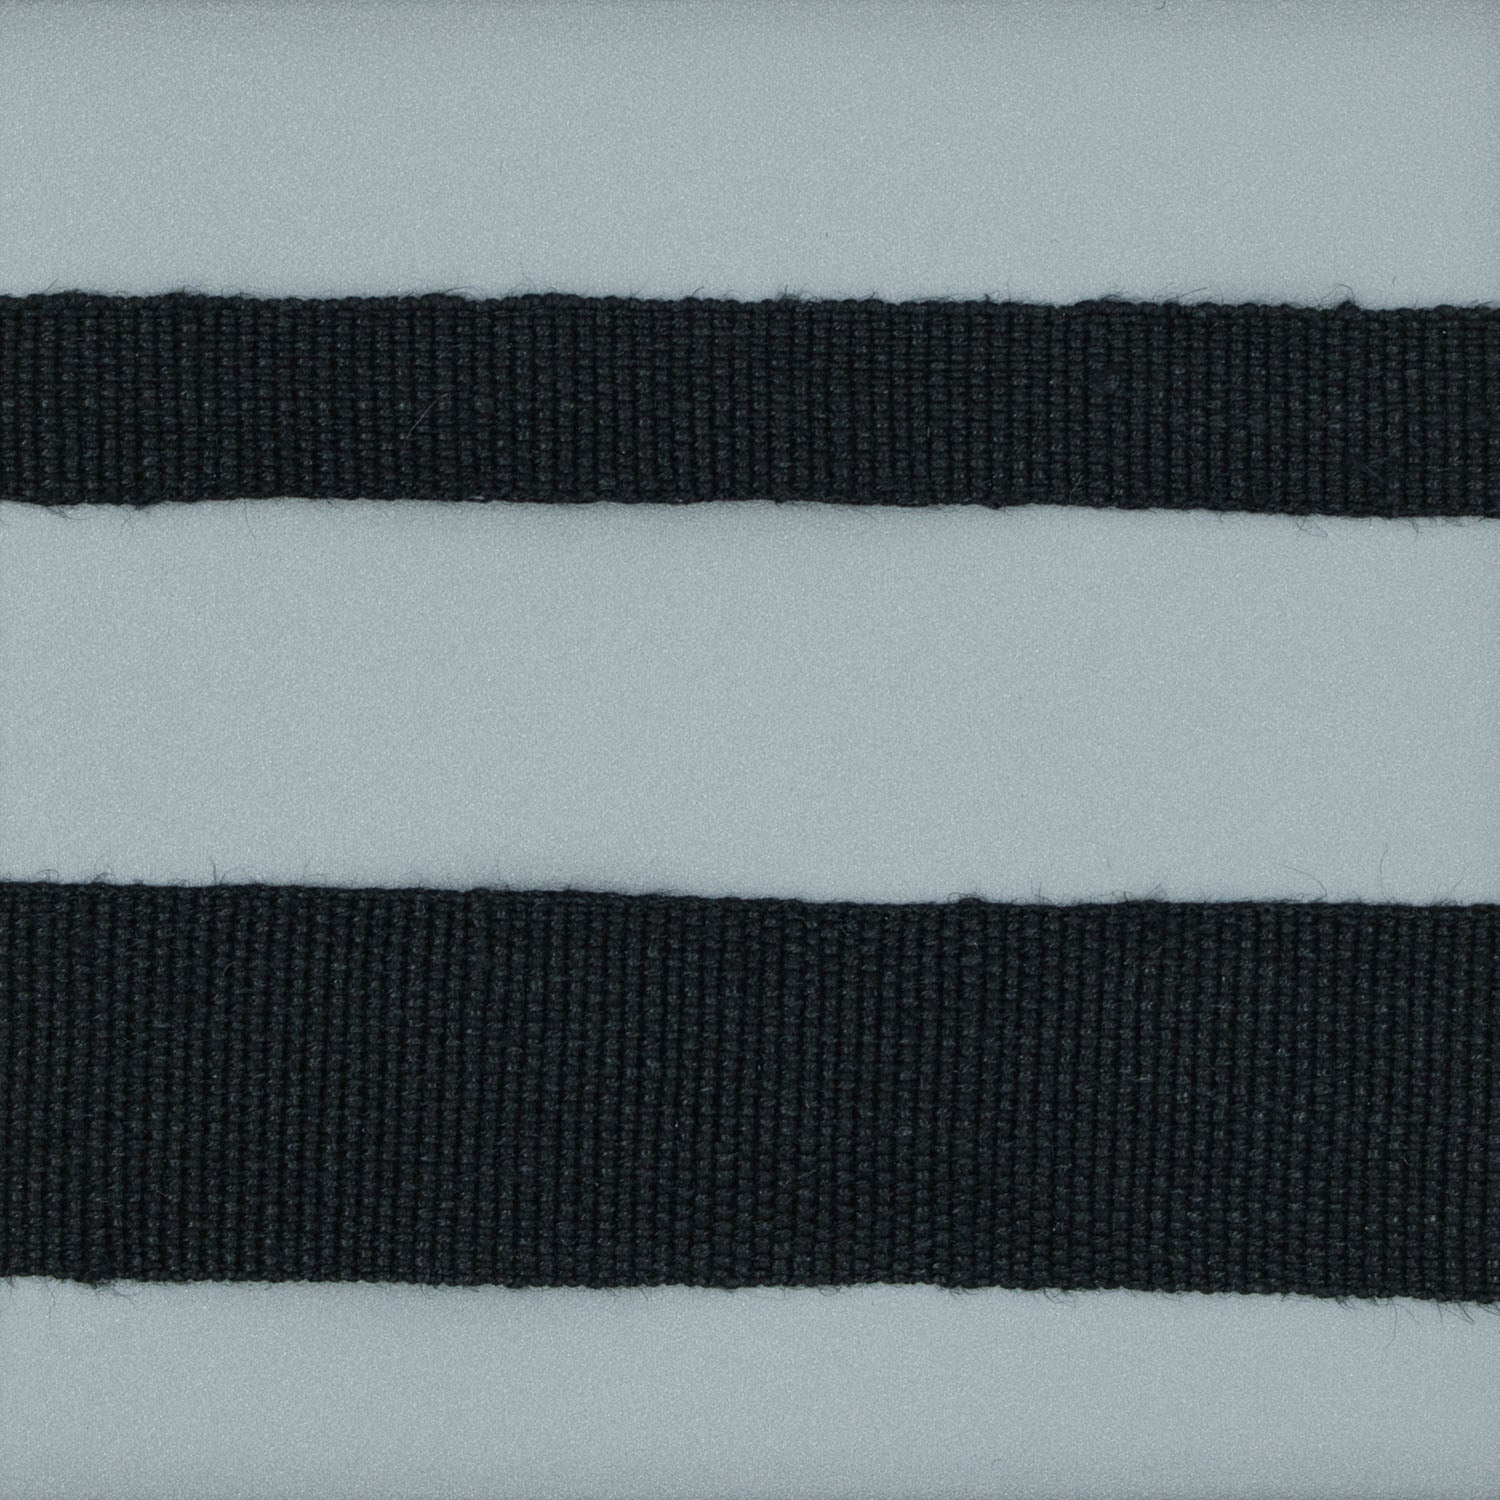 Black linen plain weave tape in 3/8 and 3/4 inch